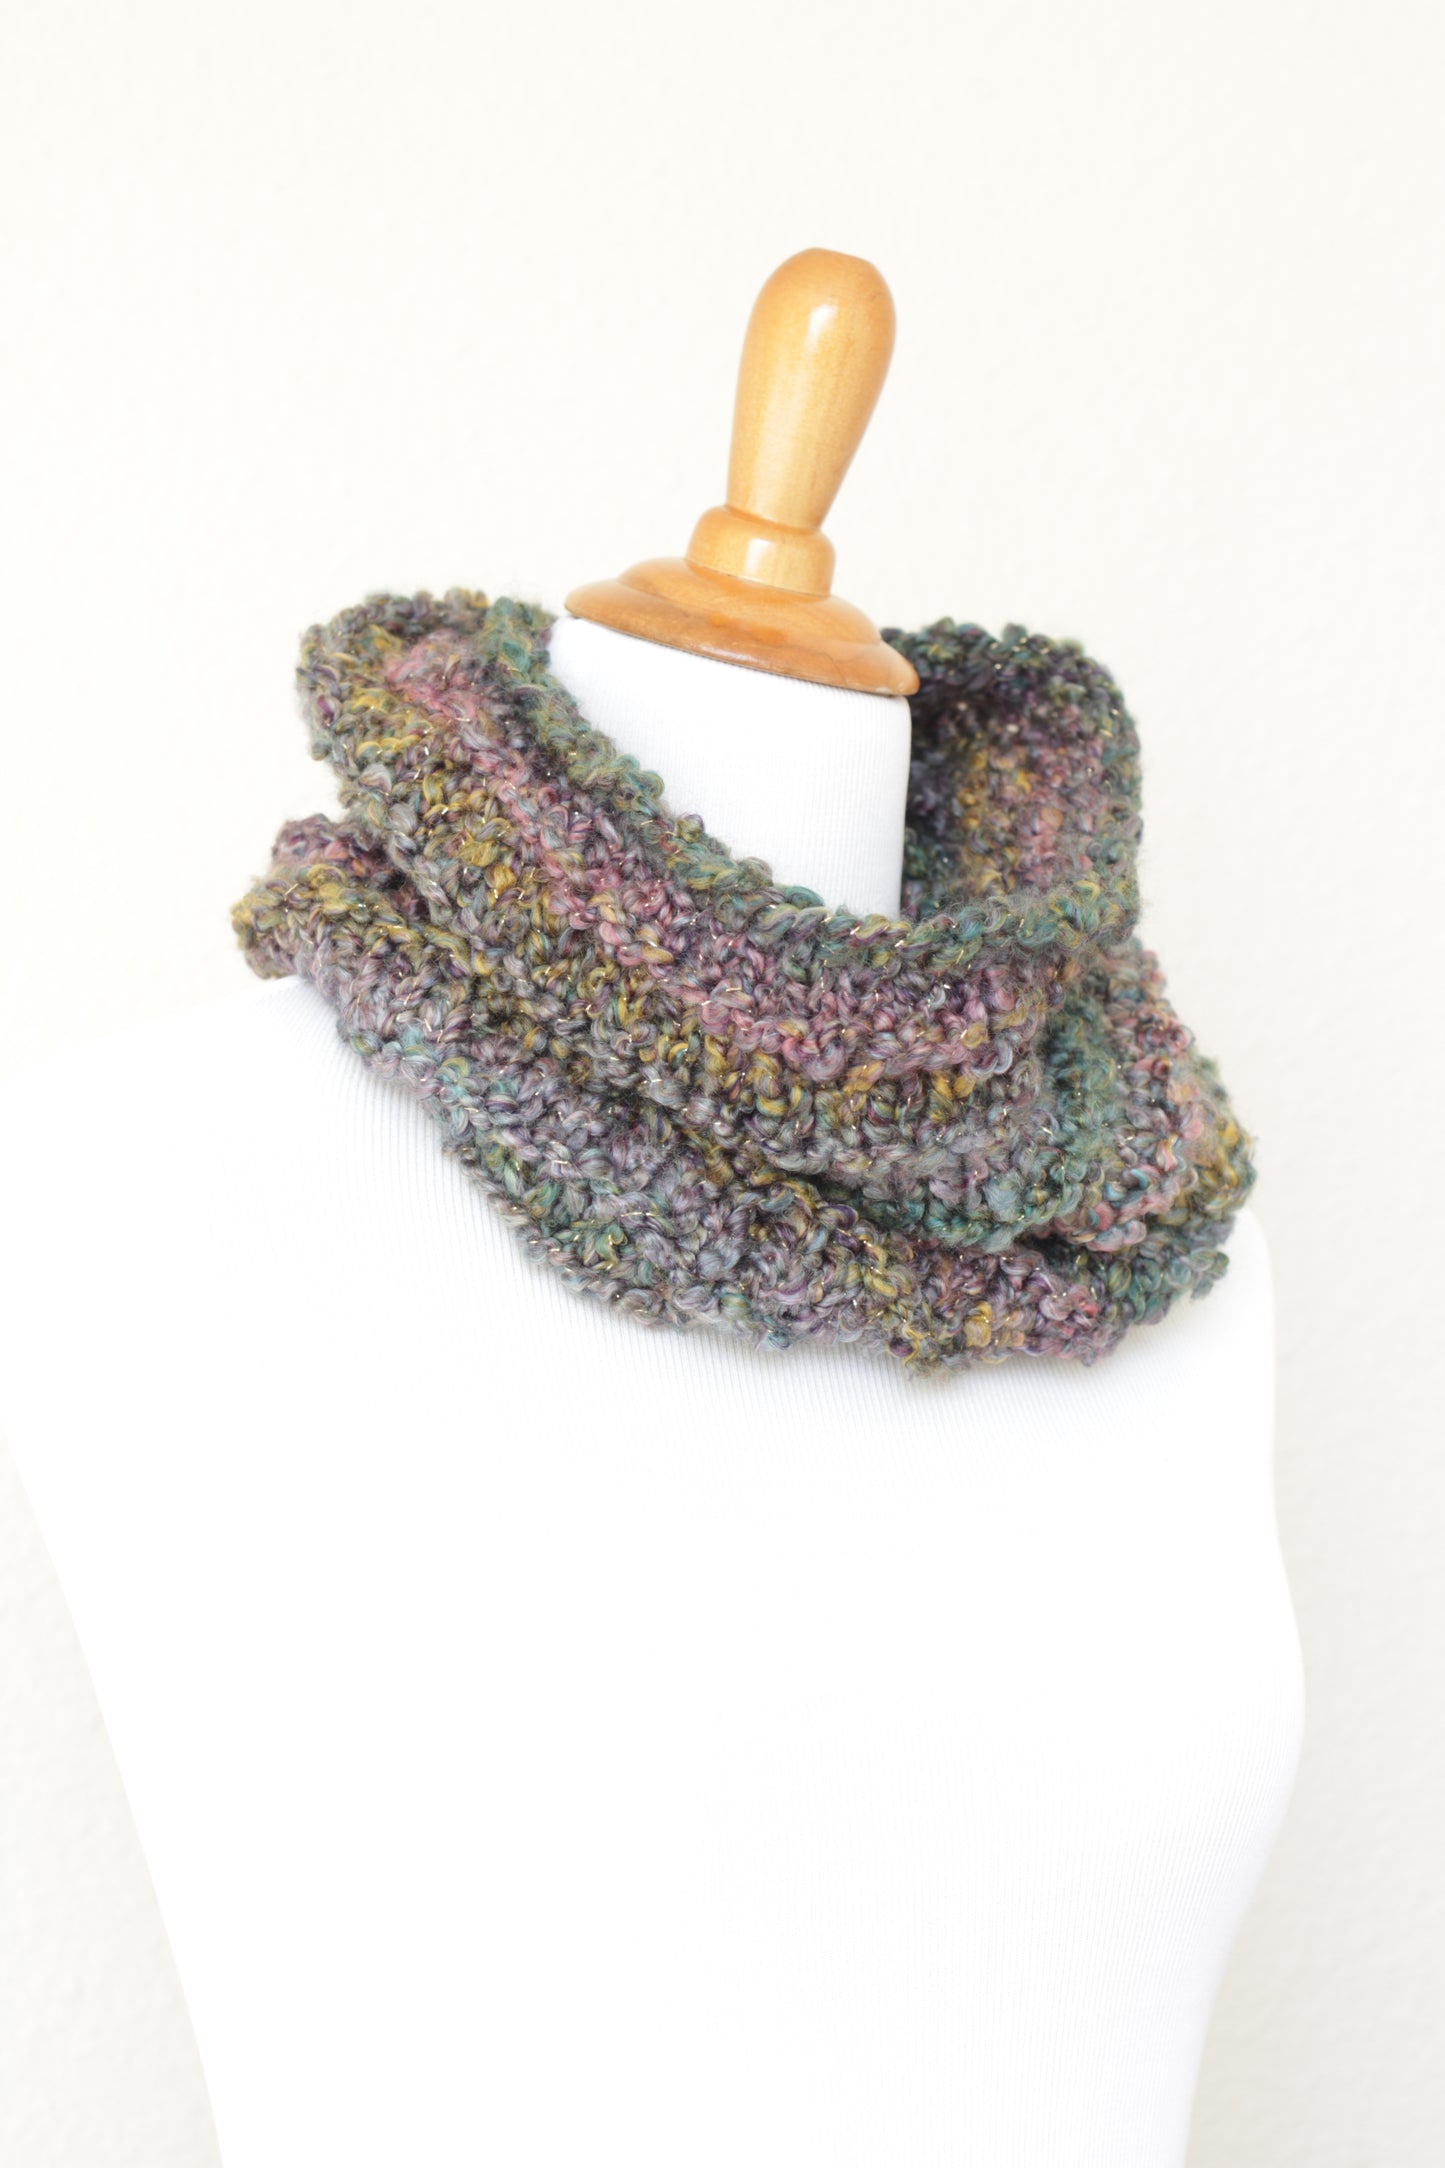 Crochet cowl in green and lavender colors, chunky infinity scarf - 4 colorways available